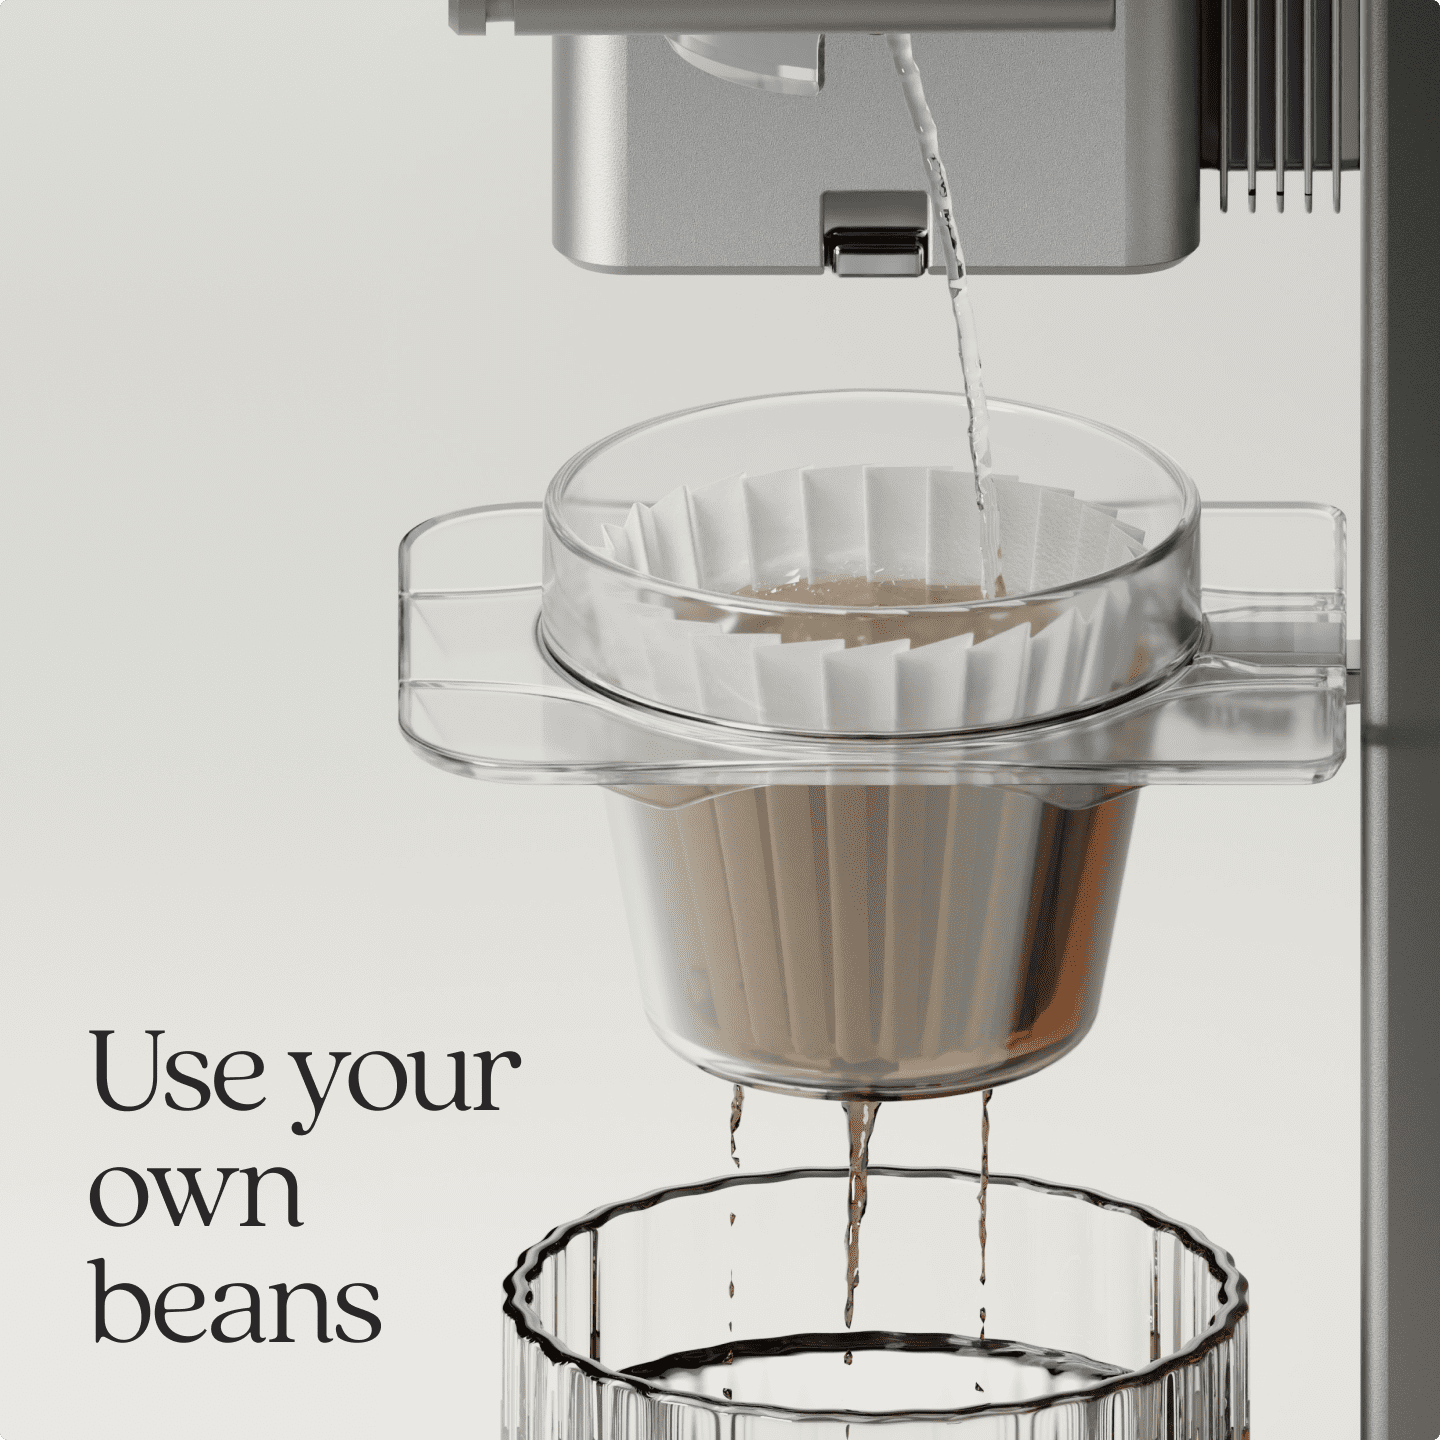 Use your own beans